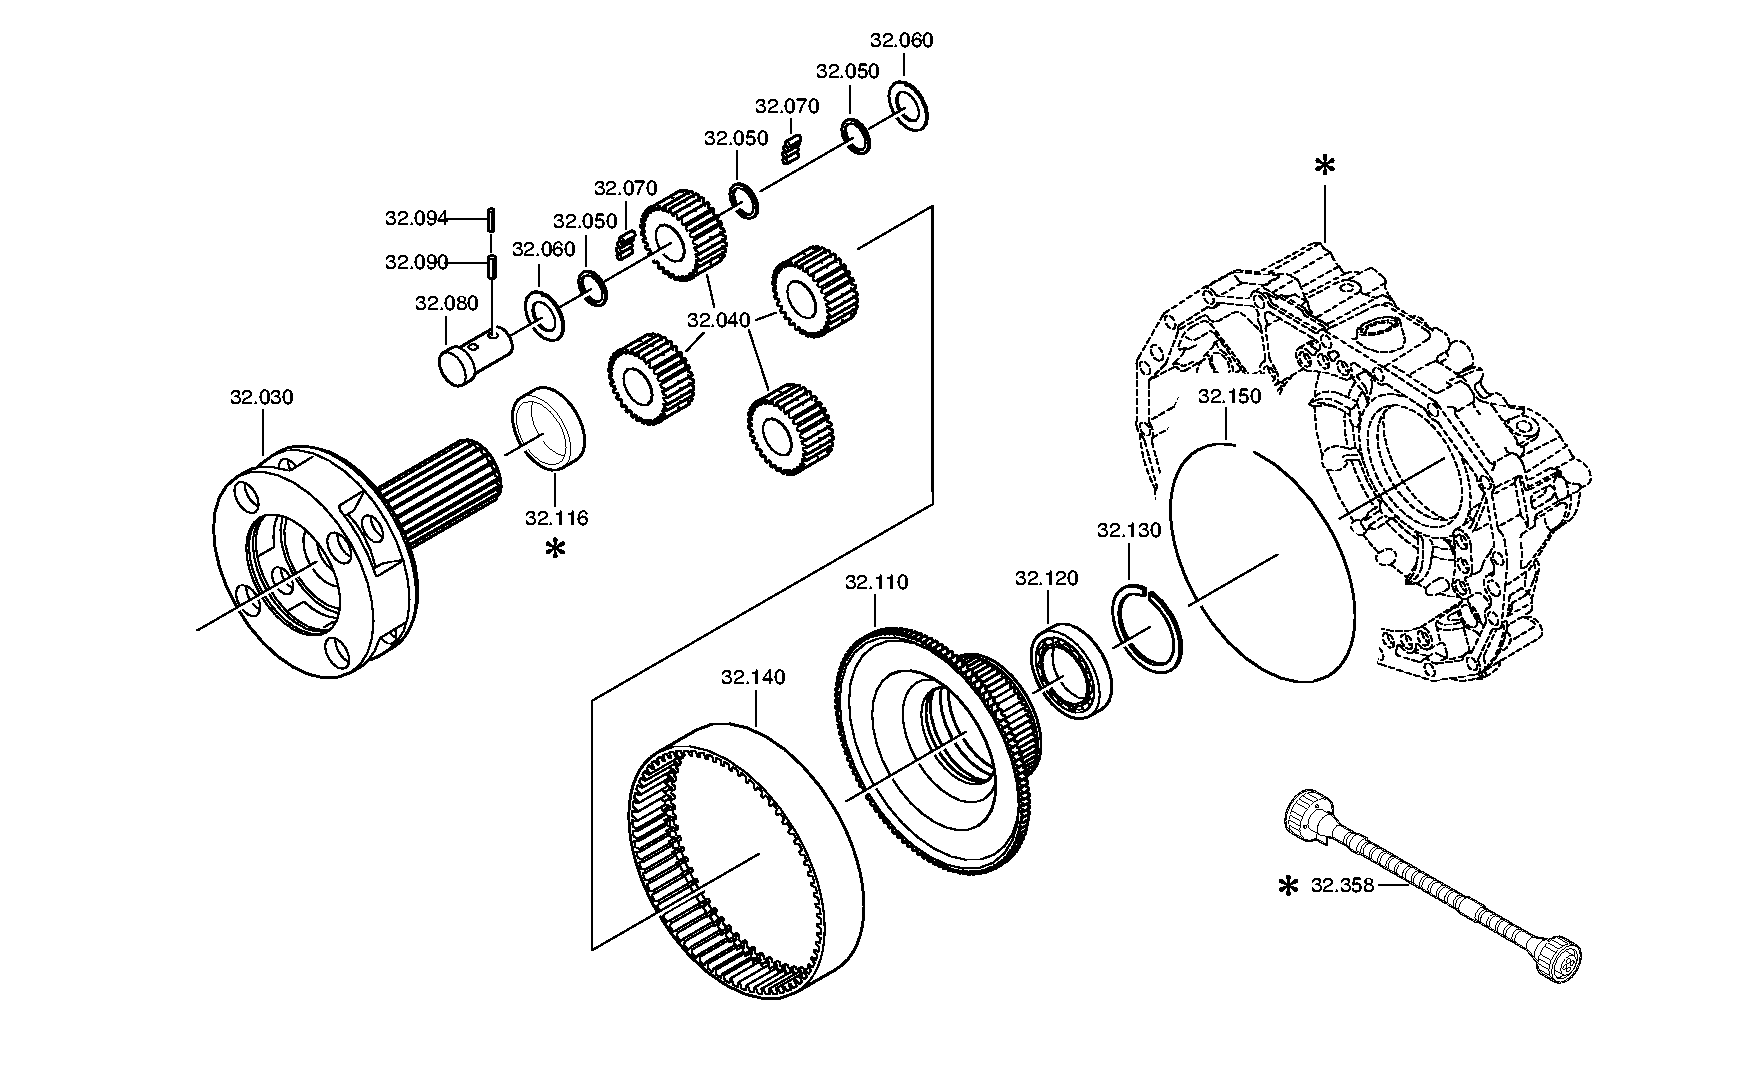 drawing for DAF 1929127 - HEXAGON SCREW (figure 1)